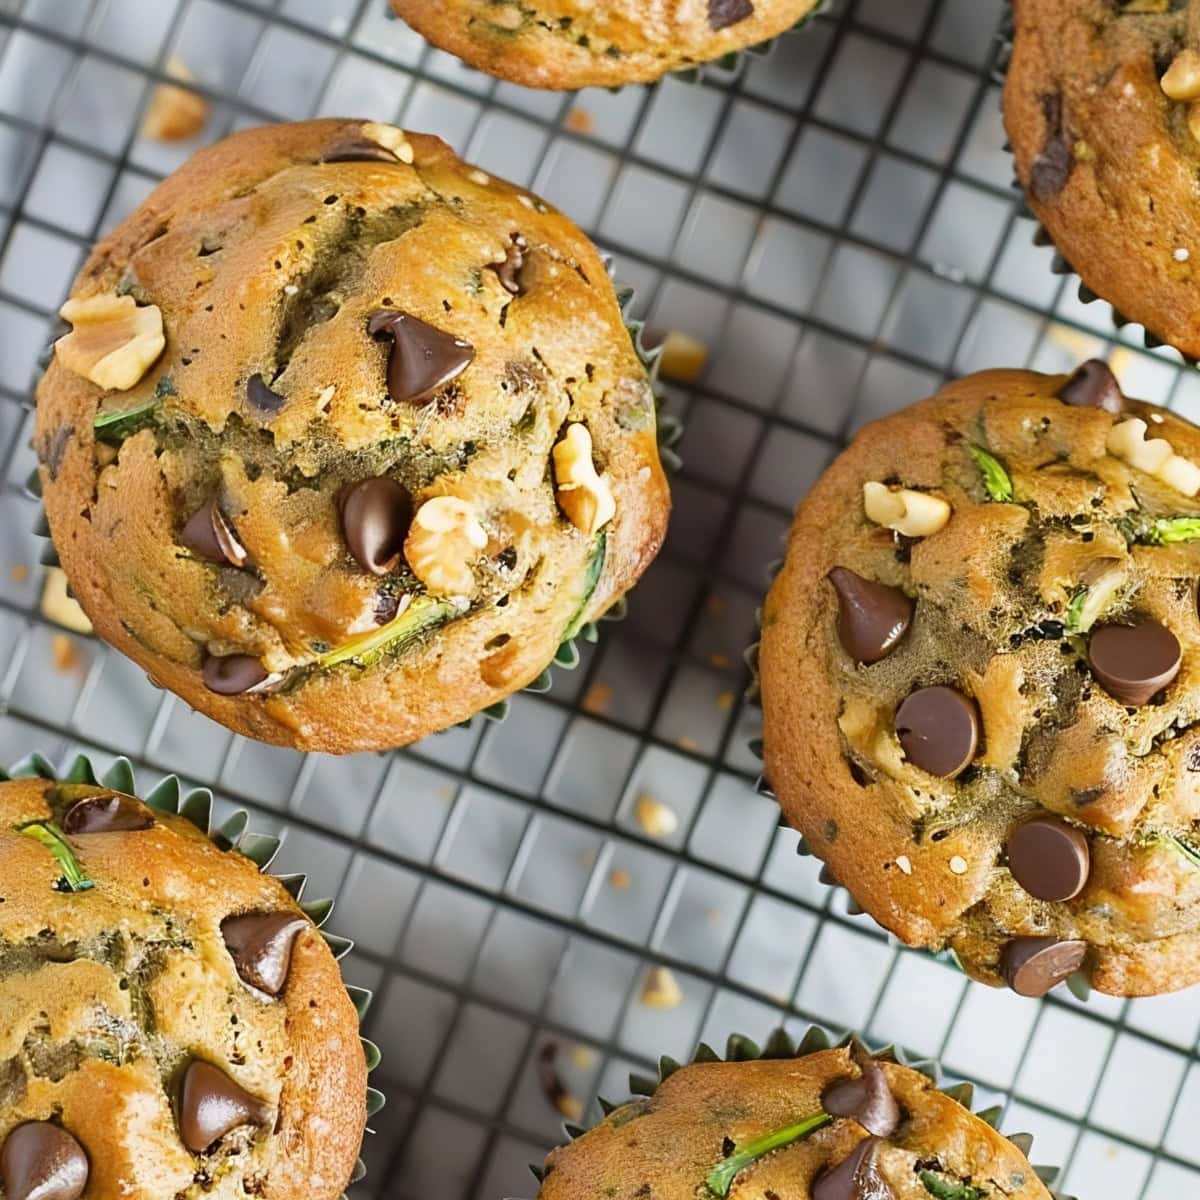 Top View of Perfectly Baked Zucchini Chocolate Chip Muffins with Visible Chocolate Chips, Walnuts, and Zucchini Bits Cooling on a Wire Rack